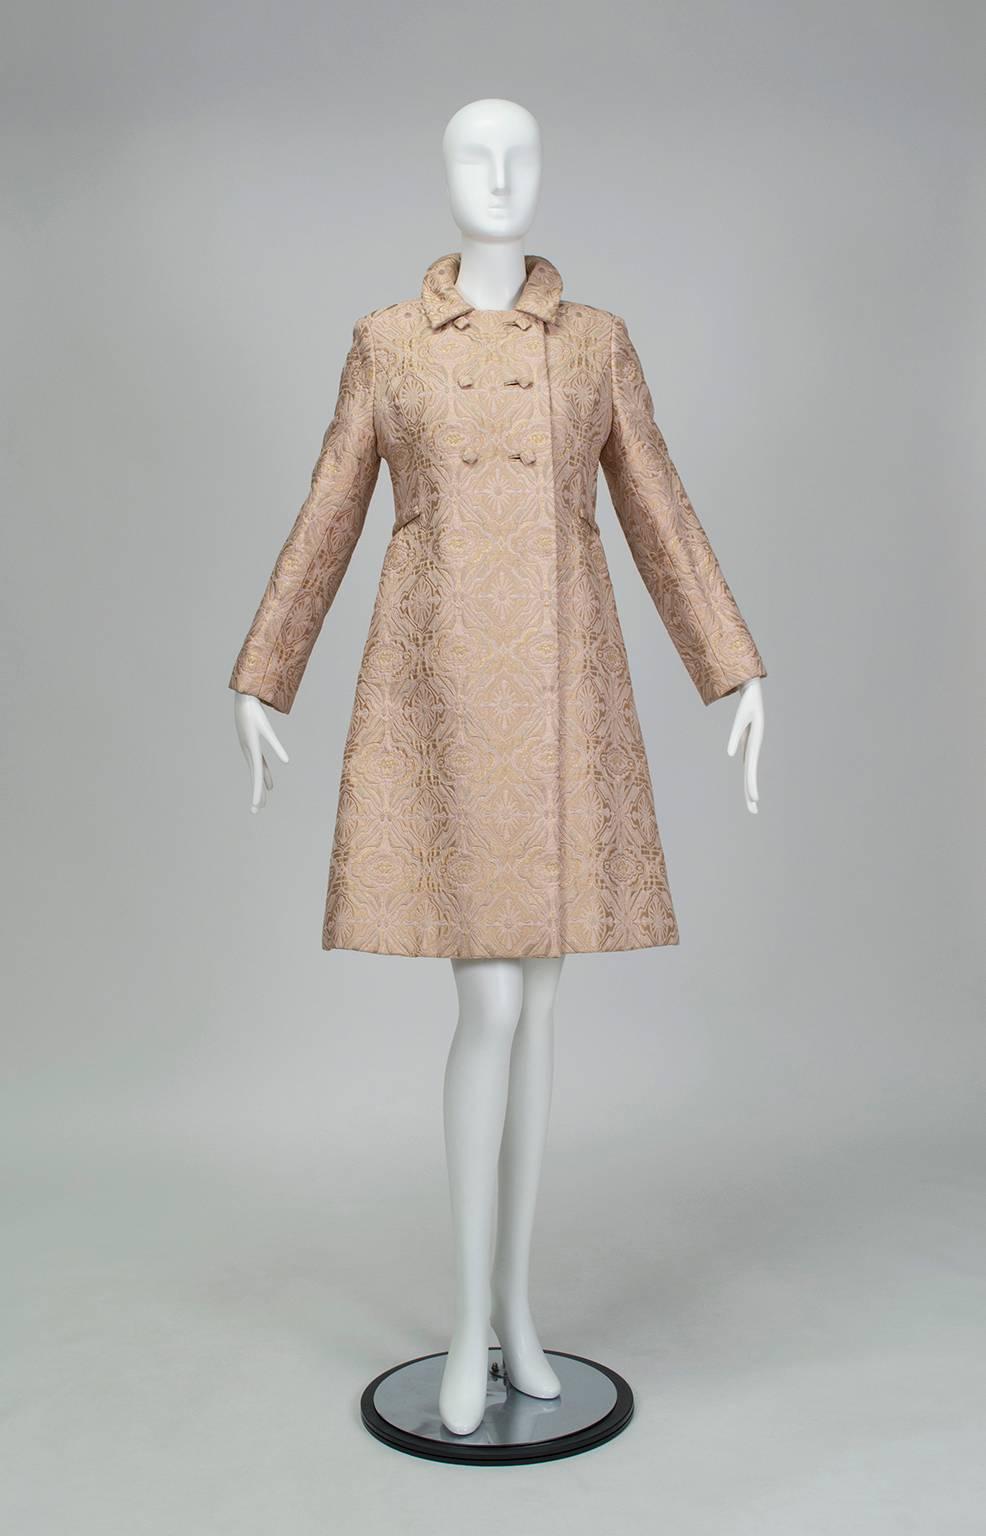 The spit-and-image of an early Oleg Cassini, this is the kind of well-bred ensemble a young Jackie Kennedy would have worn for official visits in 1962. Its sharp A-line silhouette and half-buttoning double breasted coat practically beg for a walk in